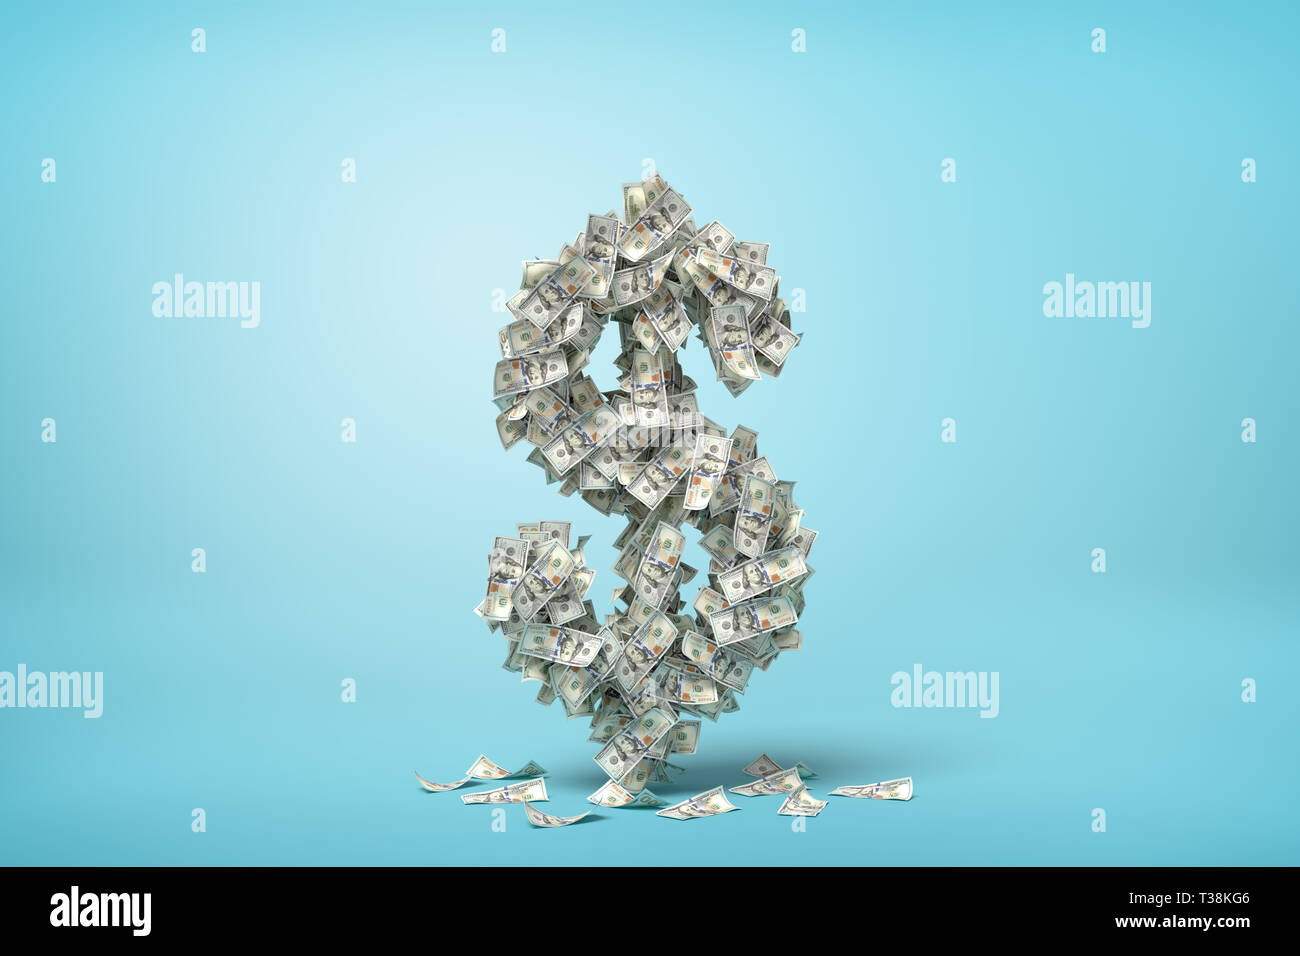 3d rendering of big dollar sign made of banknotes on blue background Stock Photo